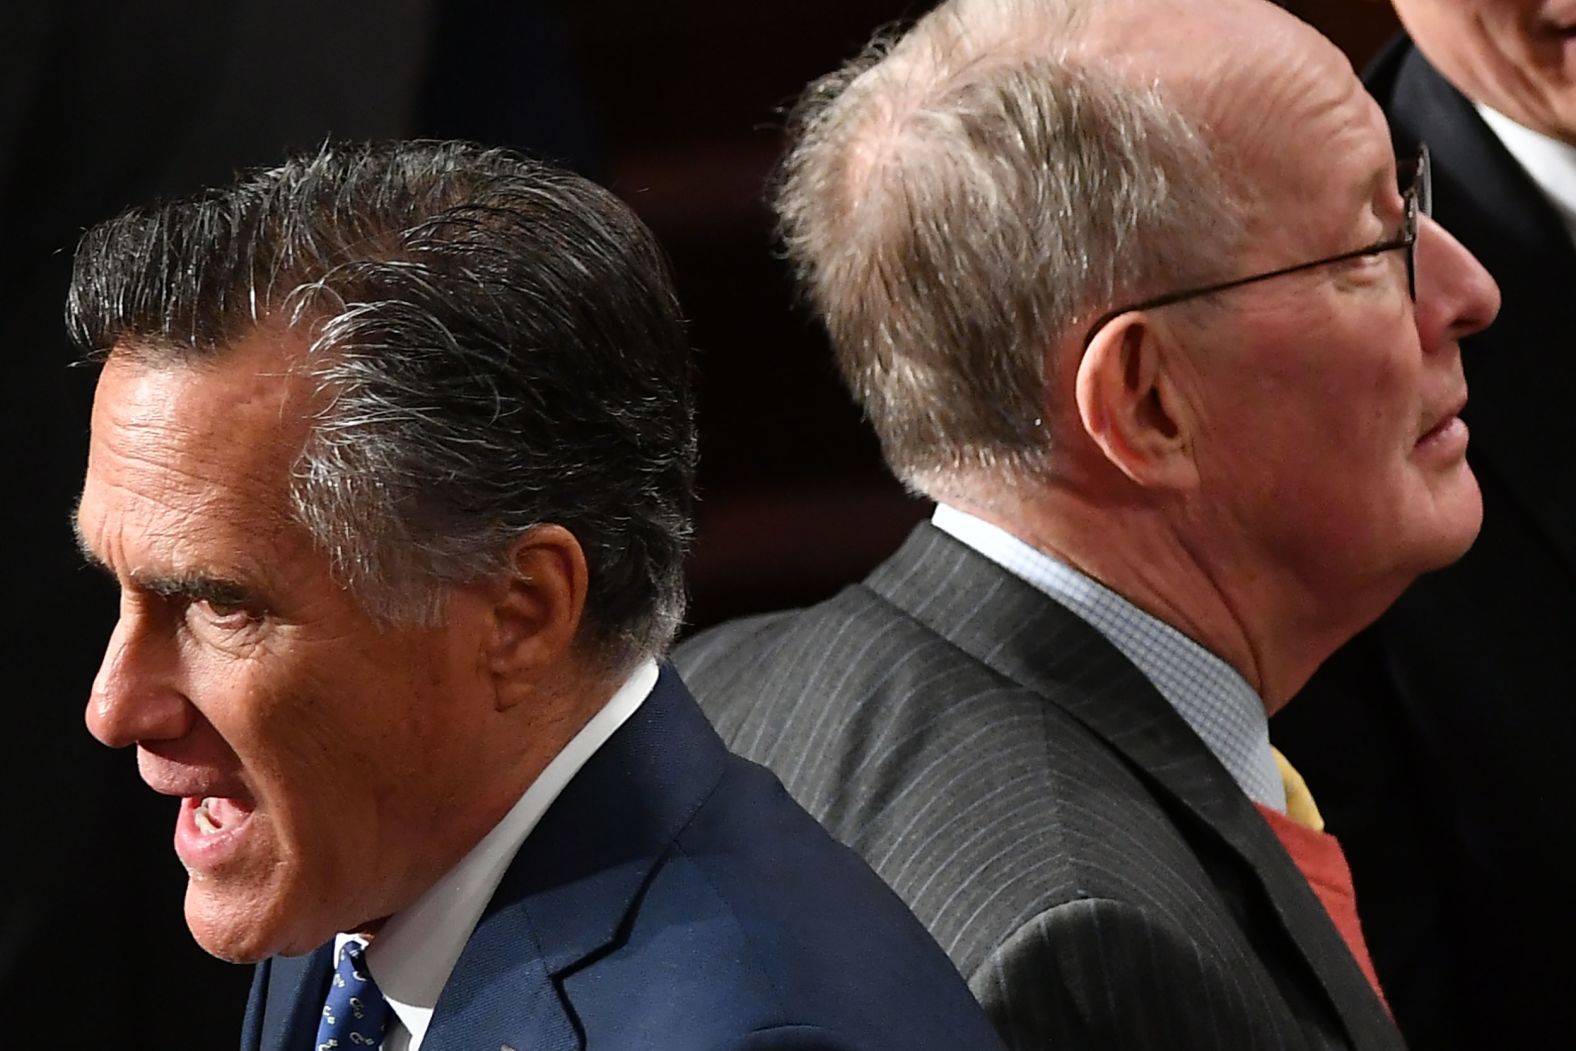 US Sens. Mitt Romney, left, and Lamar Alexander cross paths before the speech. Romney was one of two Republican senators who joined Democrats in voting to call new witnesses in Trump's impeachment trial. Alexander, a potential swing vote, voted against new witnesses.